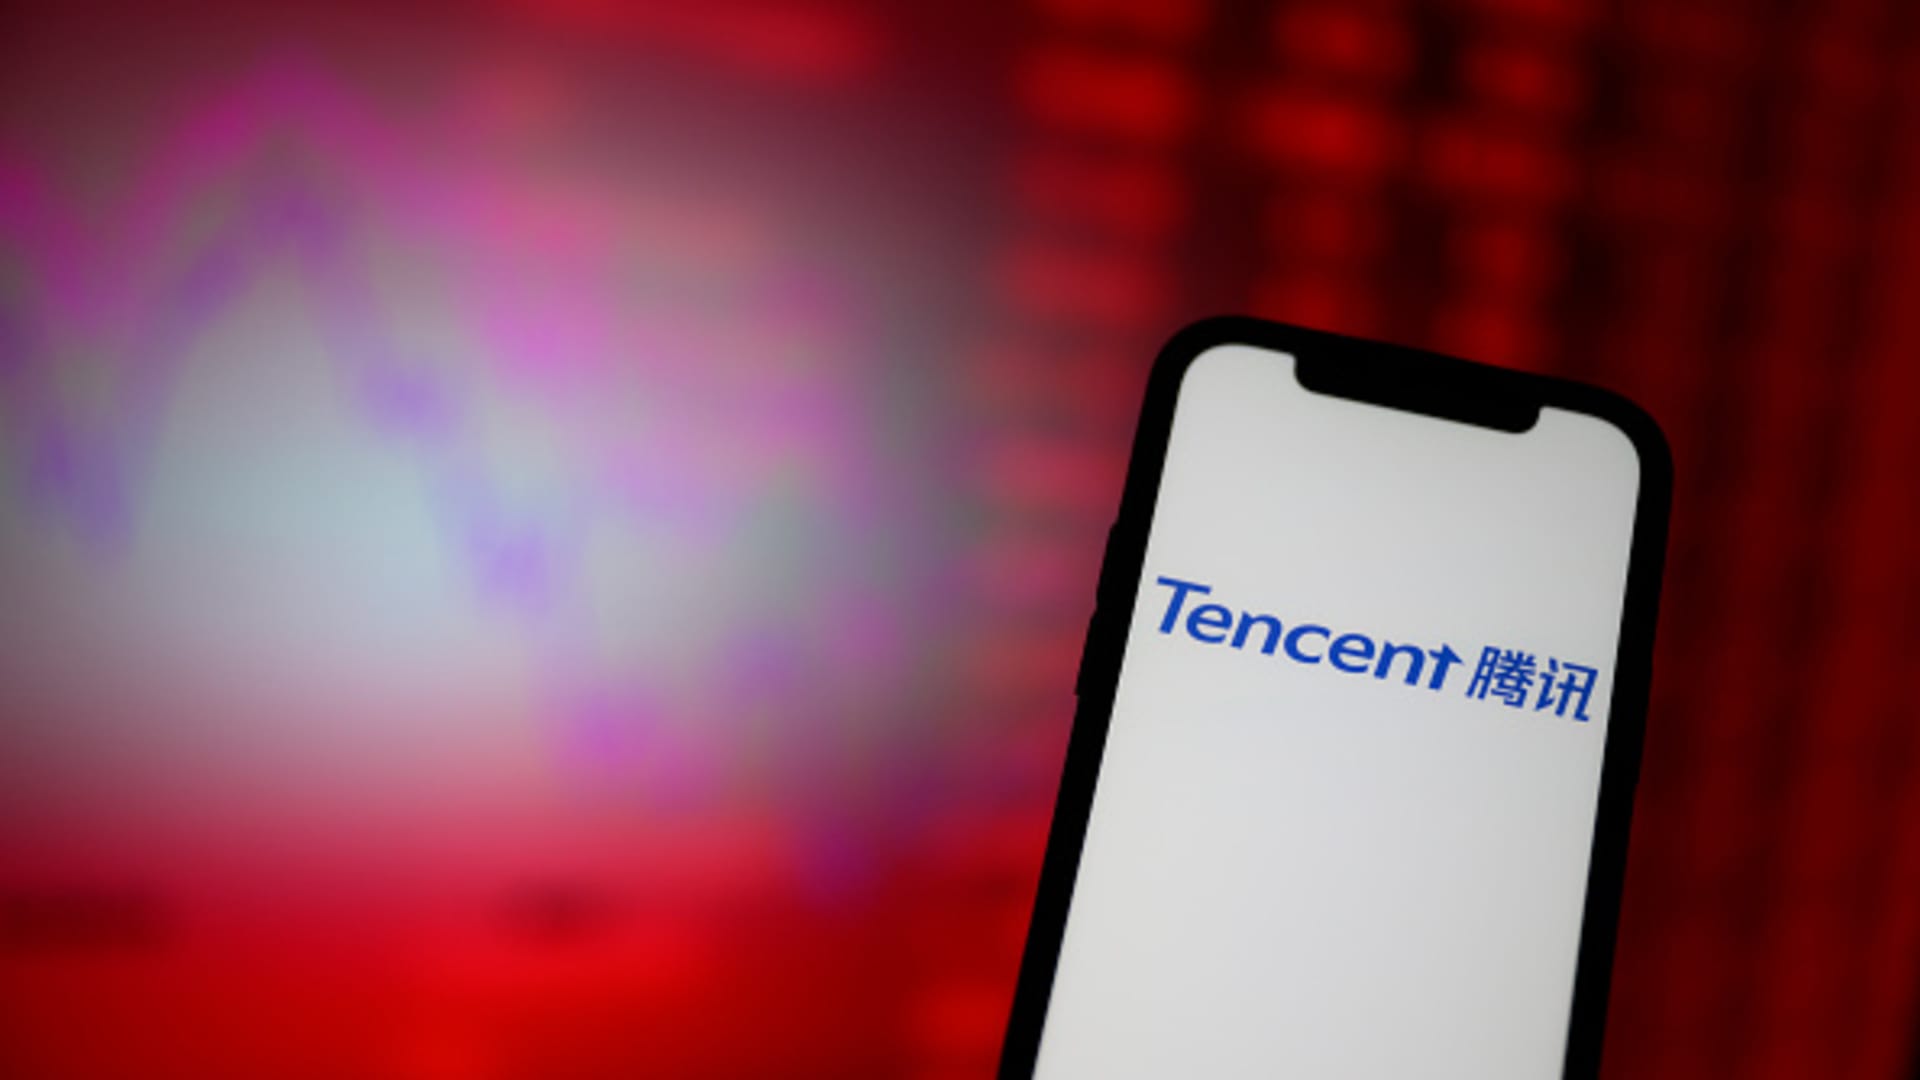 Tencent, Alibaba and more: These firms are primed for buybacks and current opportunities, states Jefferies